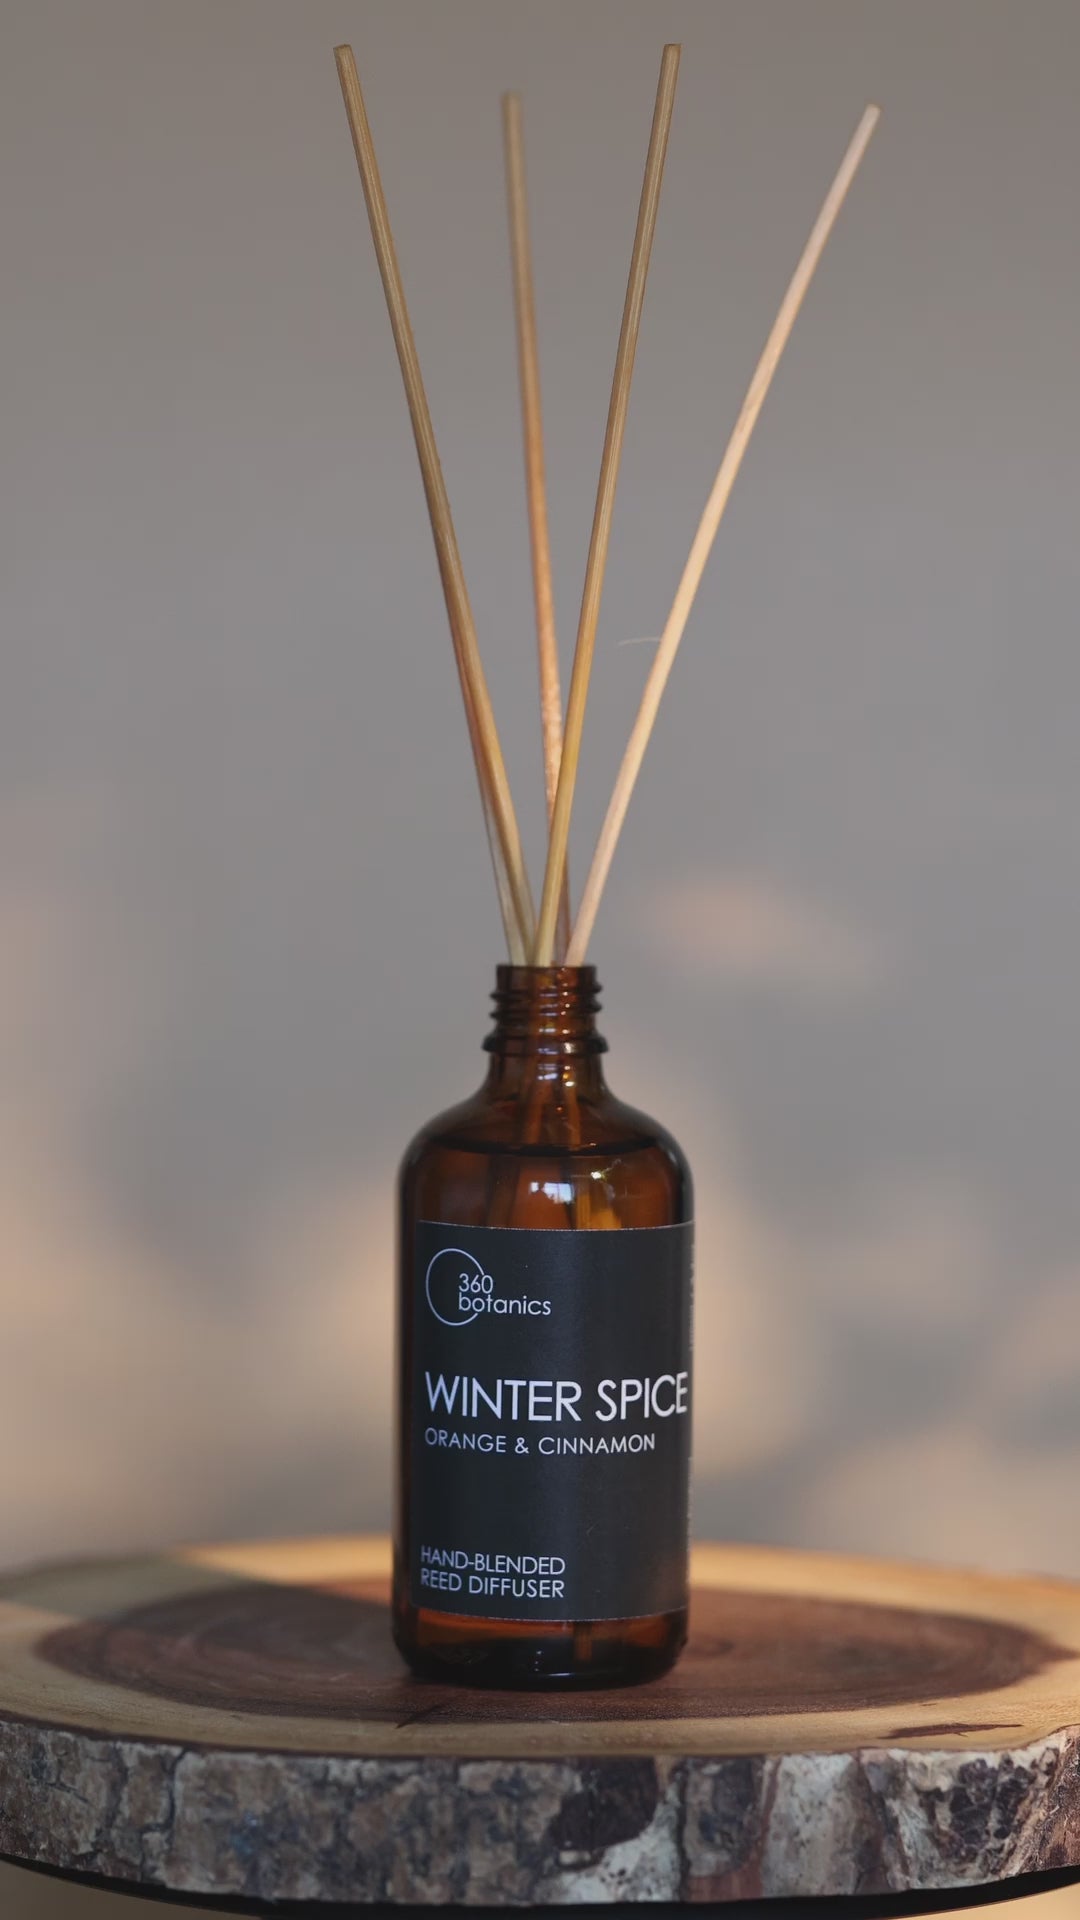 An atmospheric video of the 360 Botanics Winter Spice reed diffuser with orange and cinnamon, placed on a wooden coaster. The amber bottle with light brown reeds is highlighted by a soft, warm light in the background, invoking a cozy winter ambiance